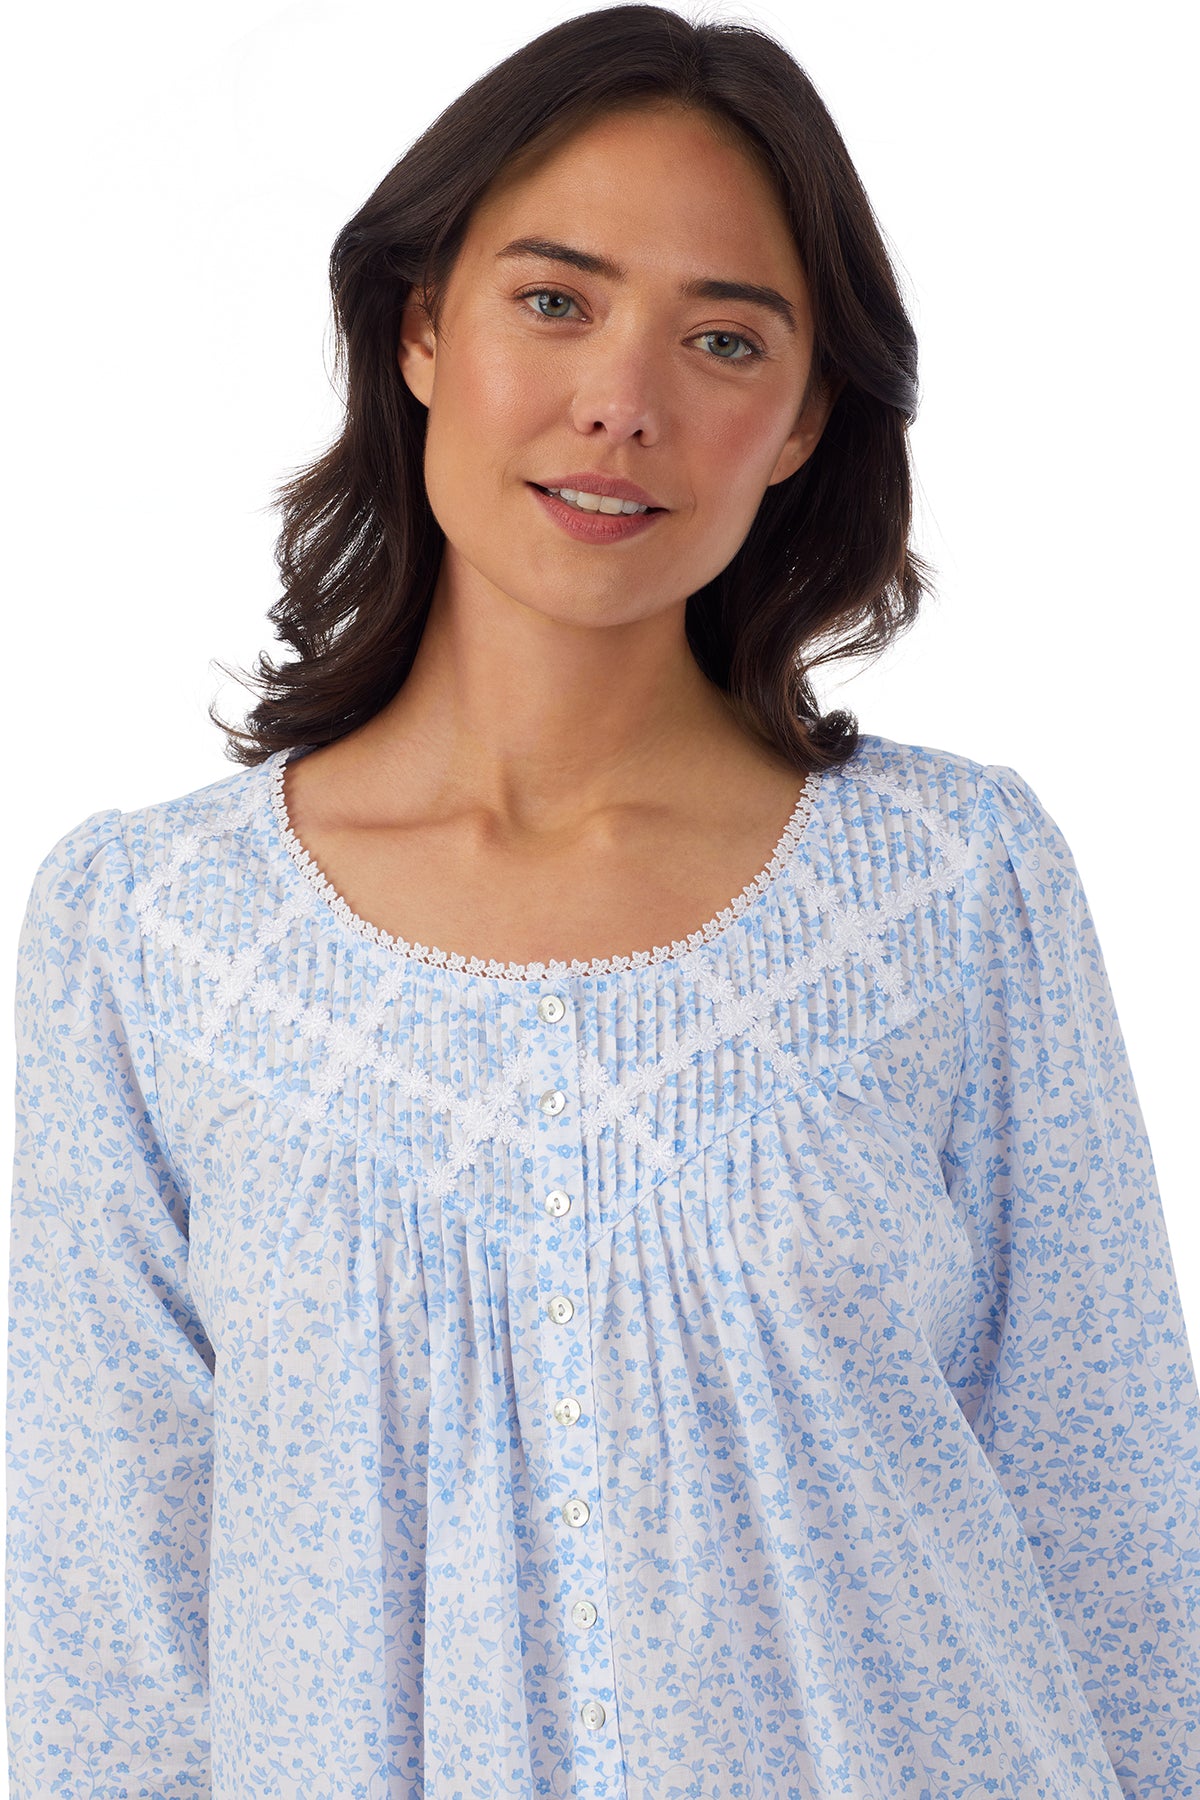 Upper body of A lady wearing white long sleeve nightgown with blue floral design